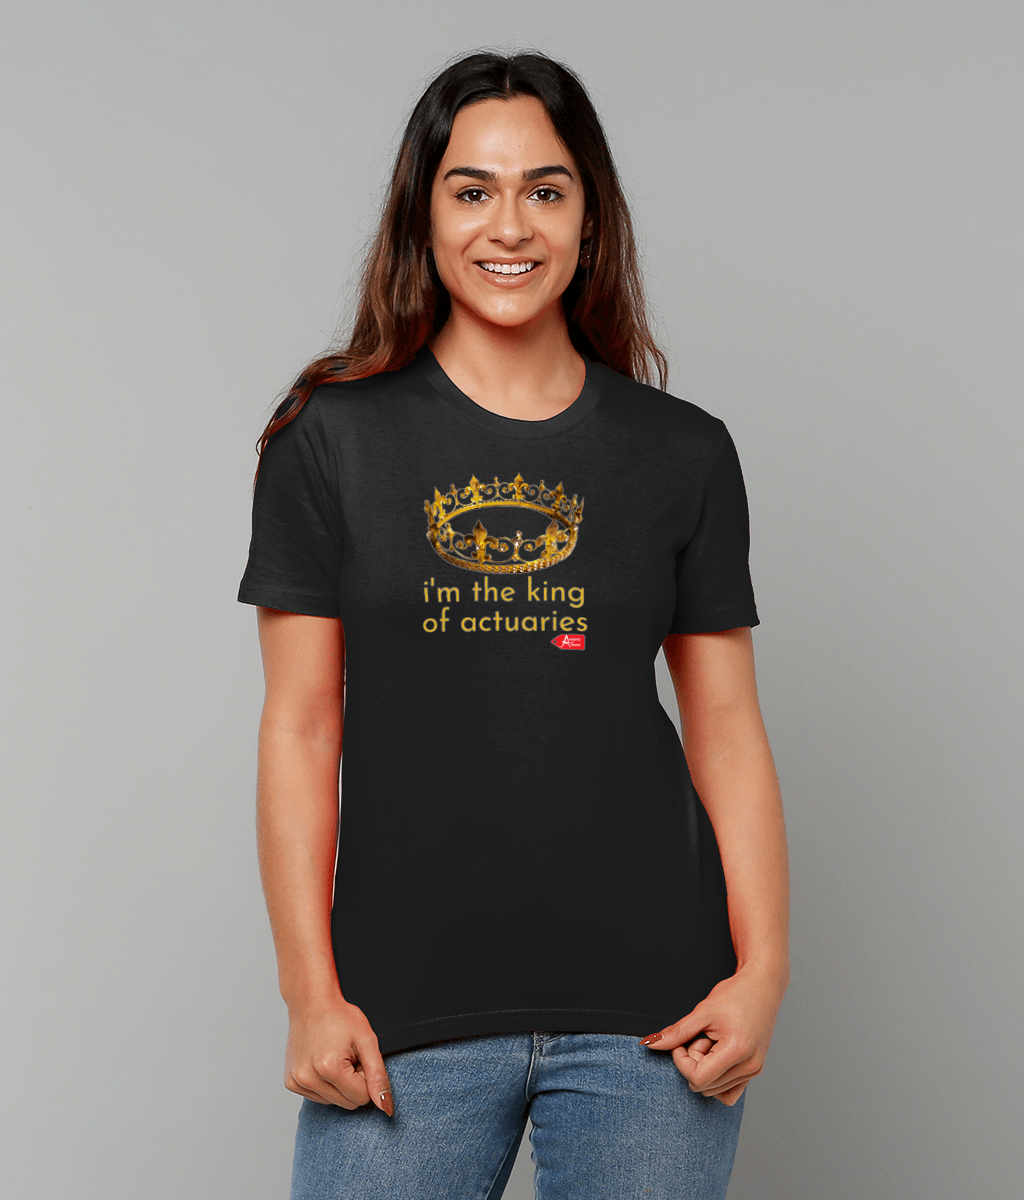 King Of The Actuaries Black T-Shirt